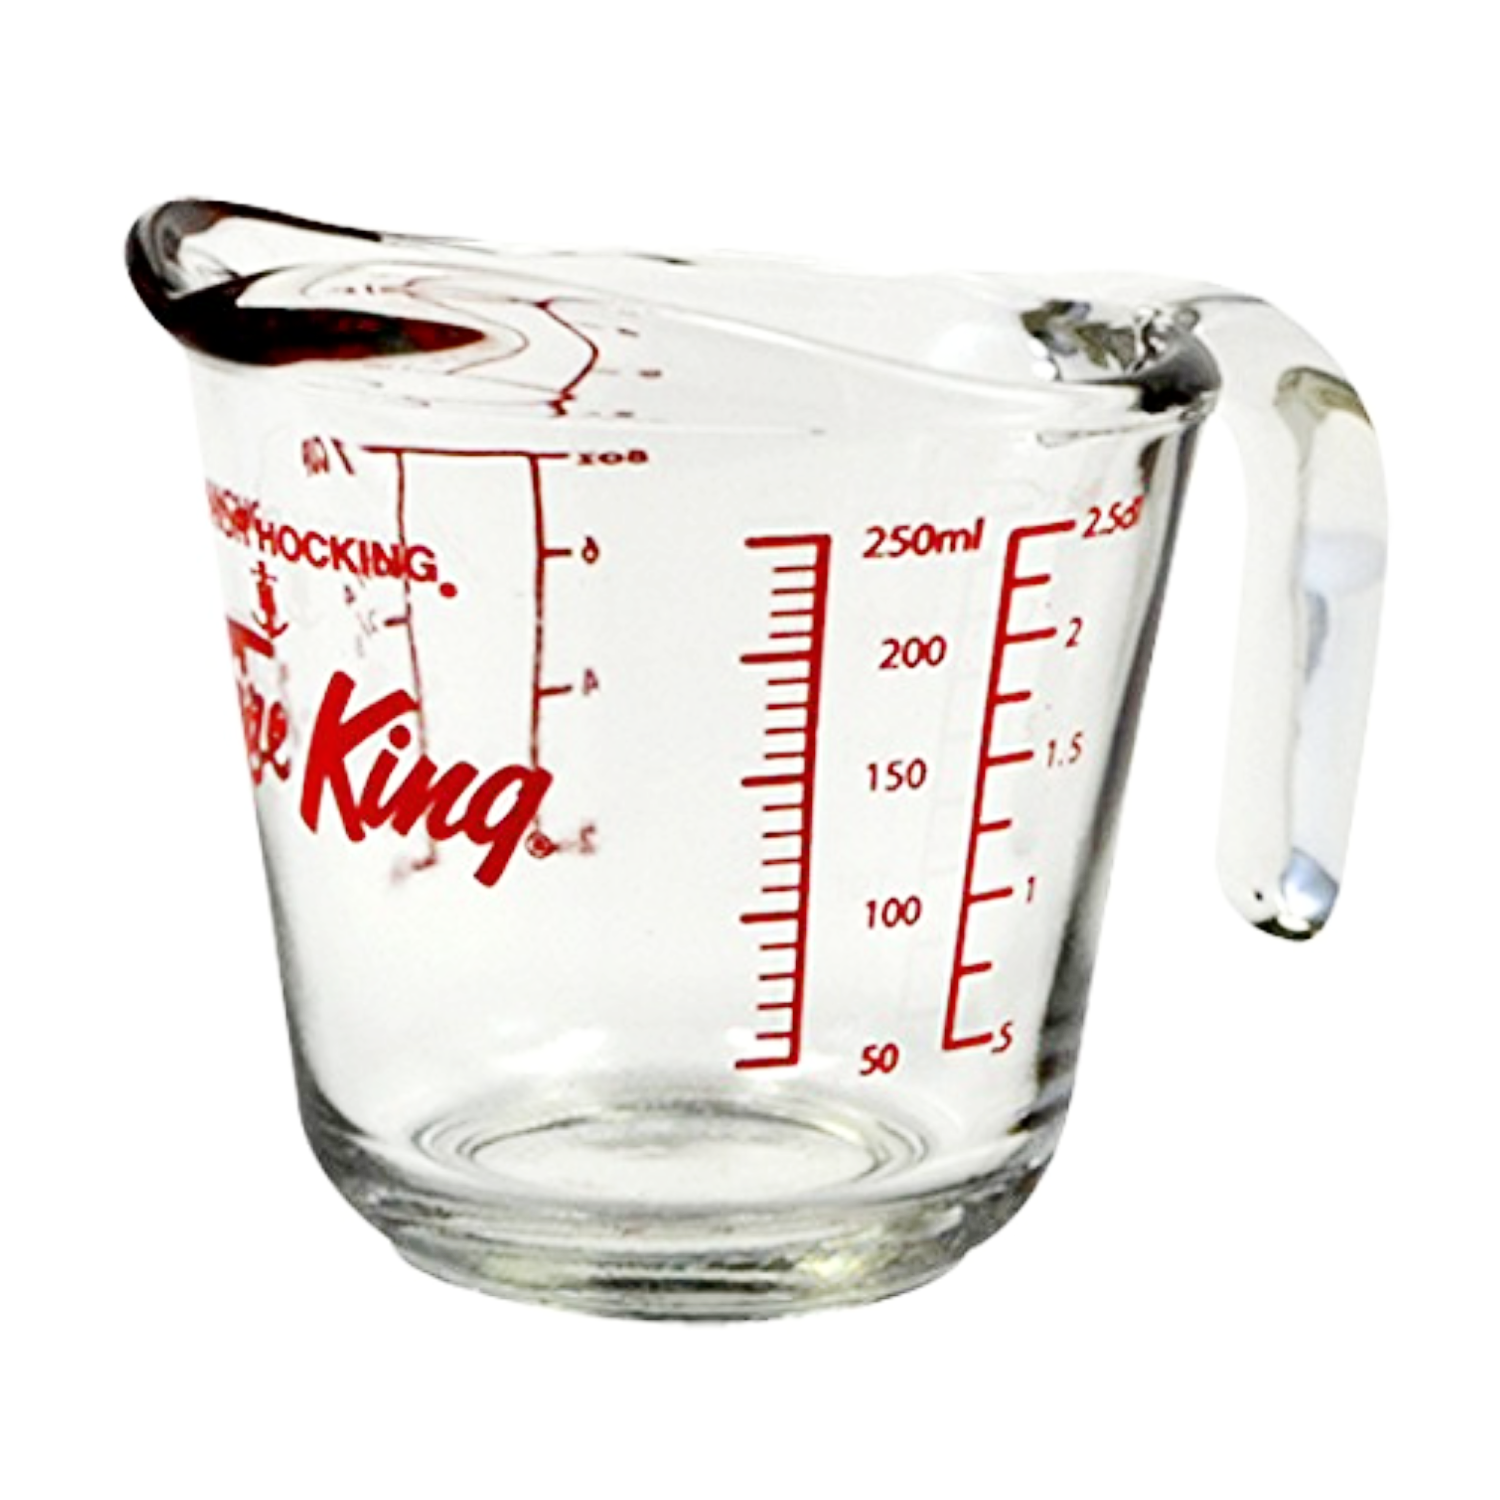 Fire King Glass Liquid Measuring Cup - 1 Cup / 250ml, Cookery